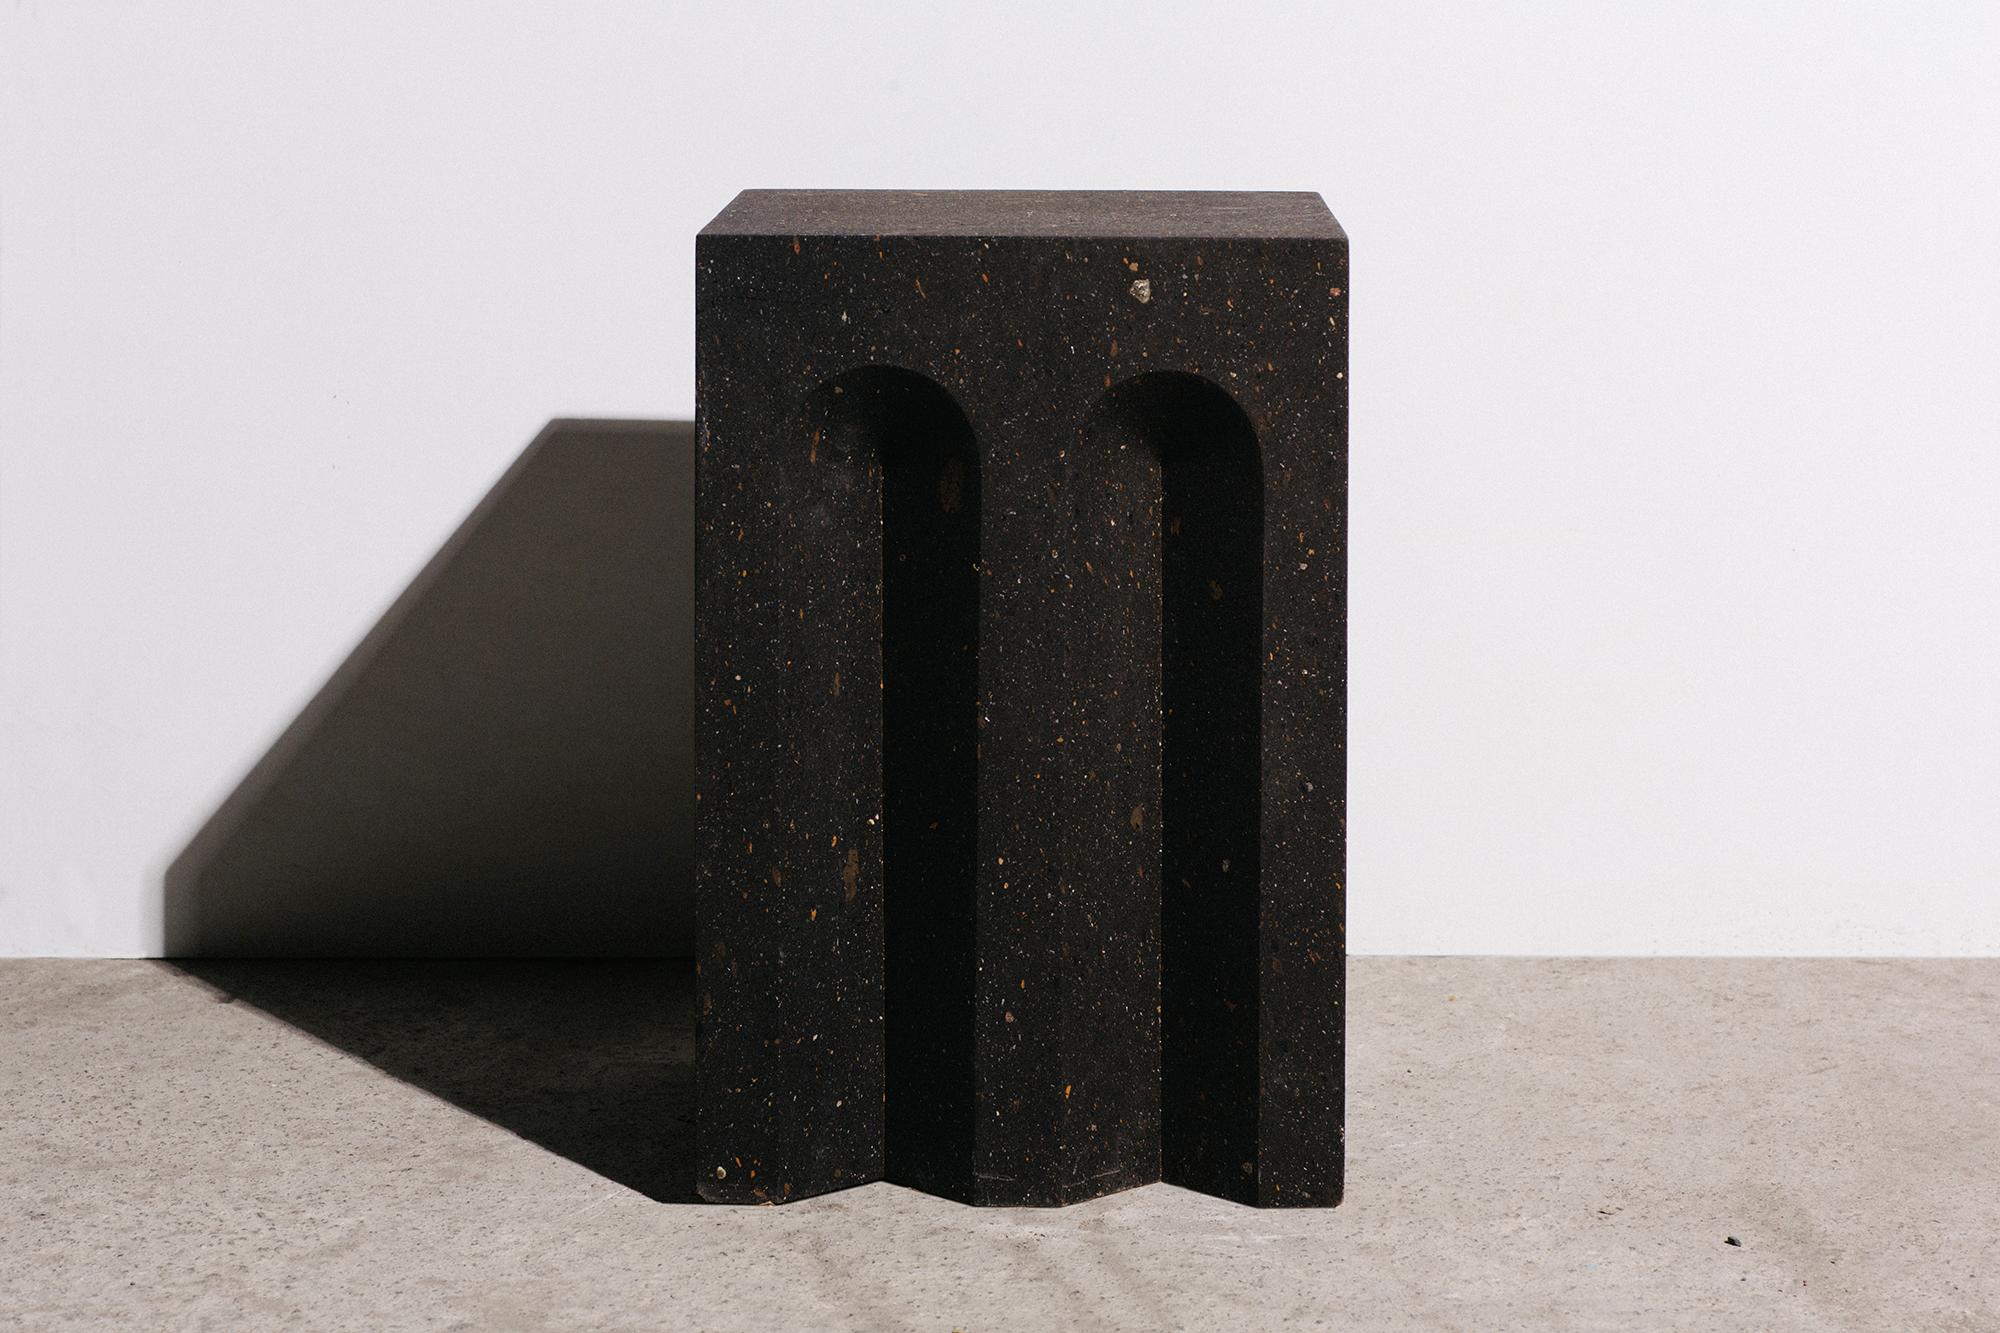 Source side table No.5 is handcrafted from black tuff in a limited edition of 10.

Source is a collection of sculptural interior objects inspired by antiquity, architecture, craftsmanship, and history of Armenia, the studio co-founder’s native